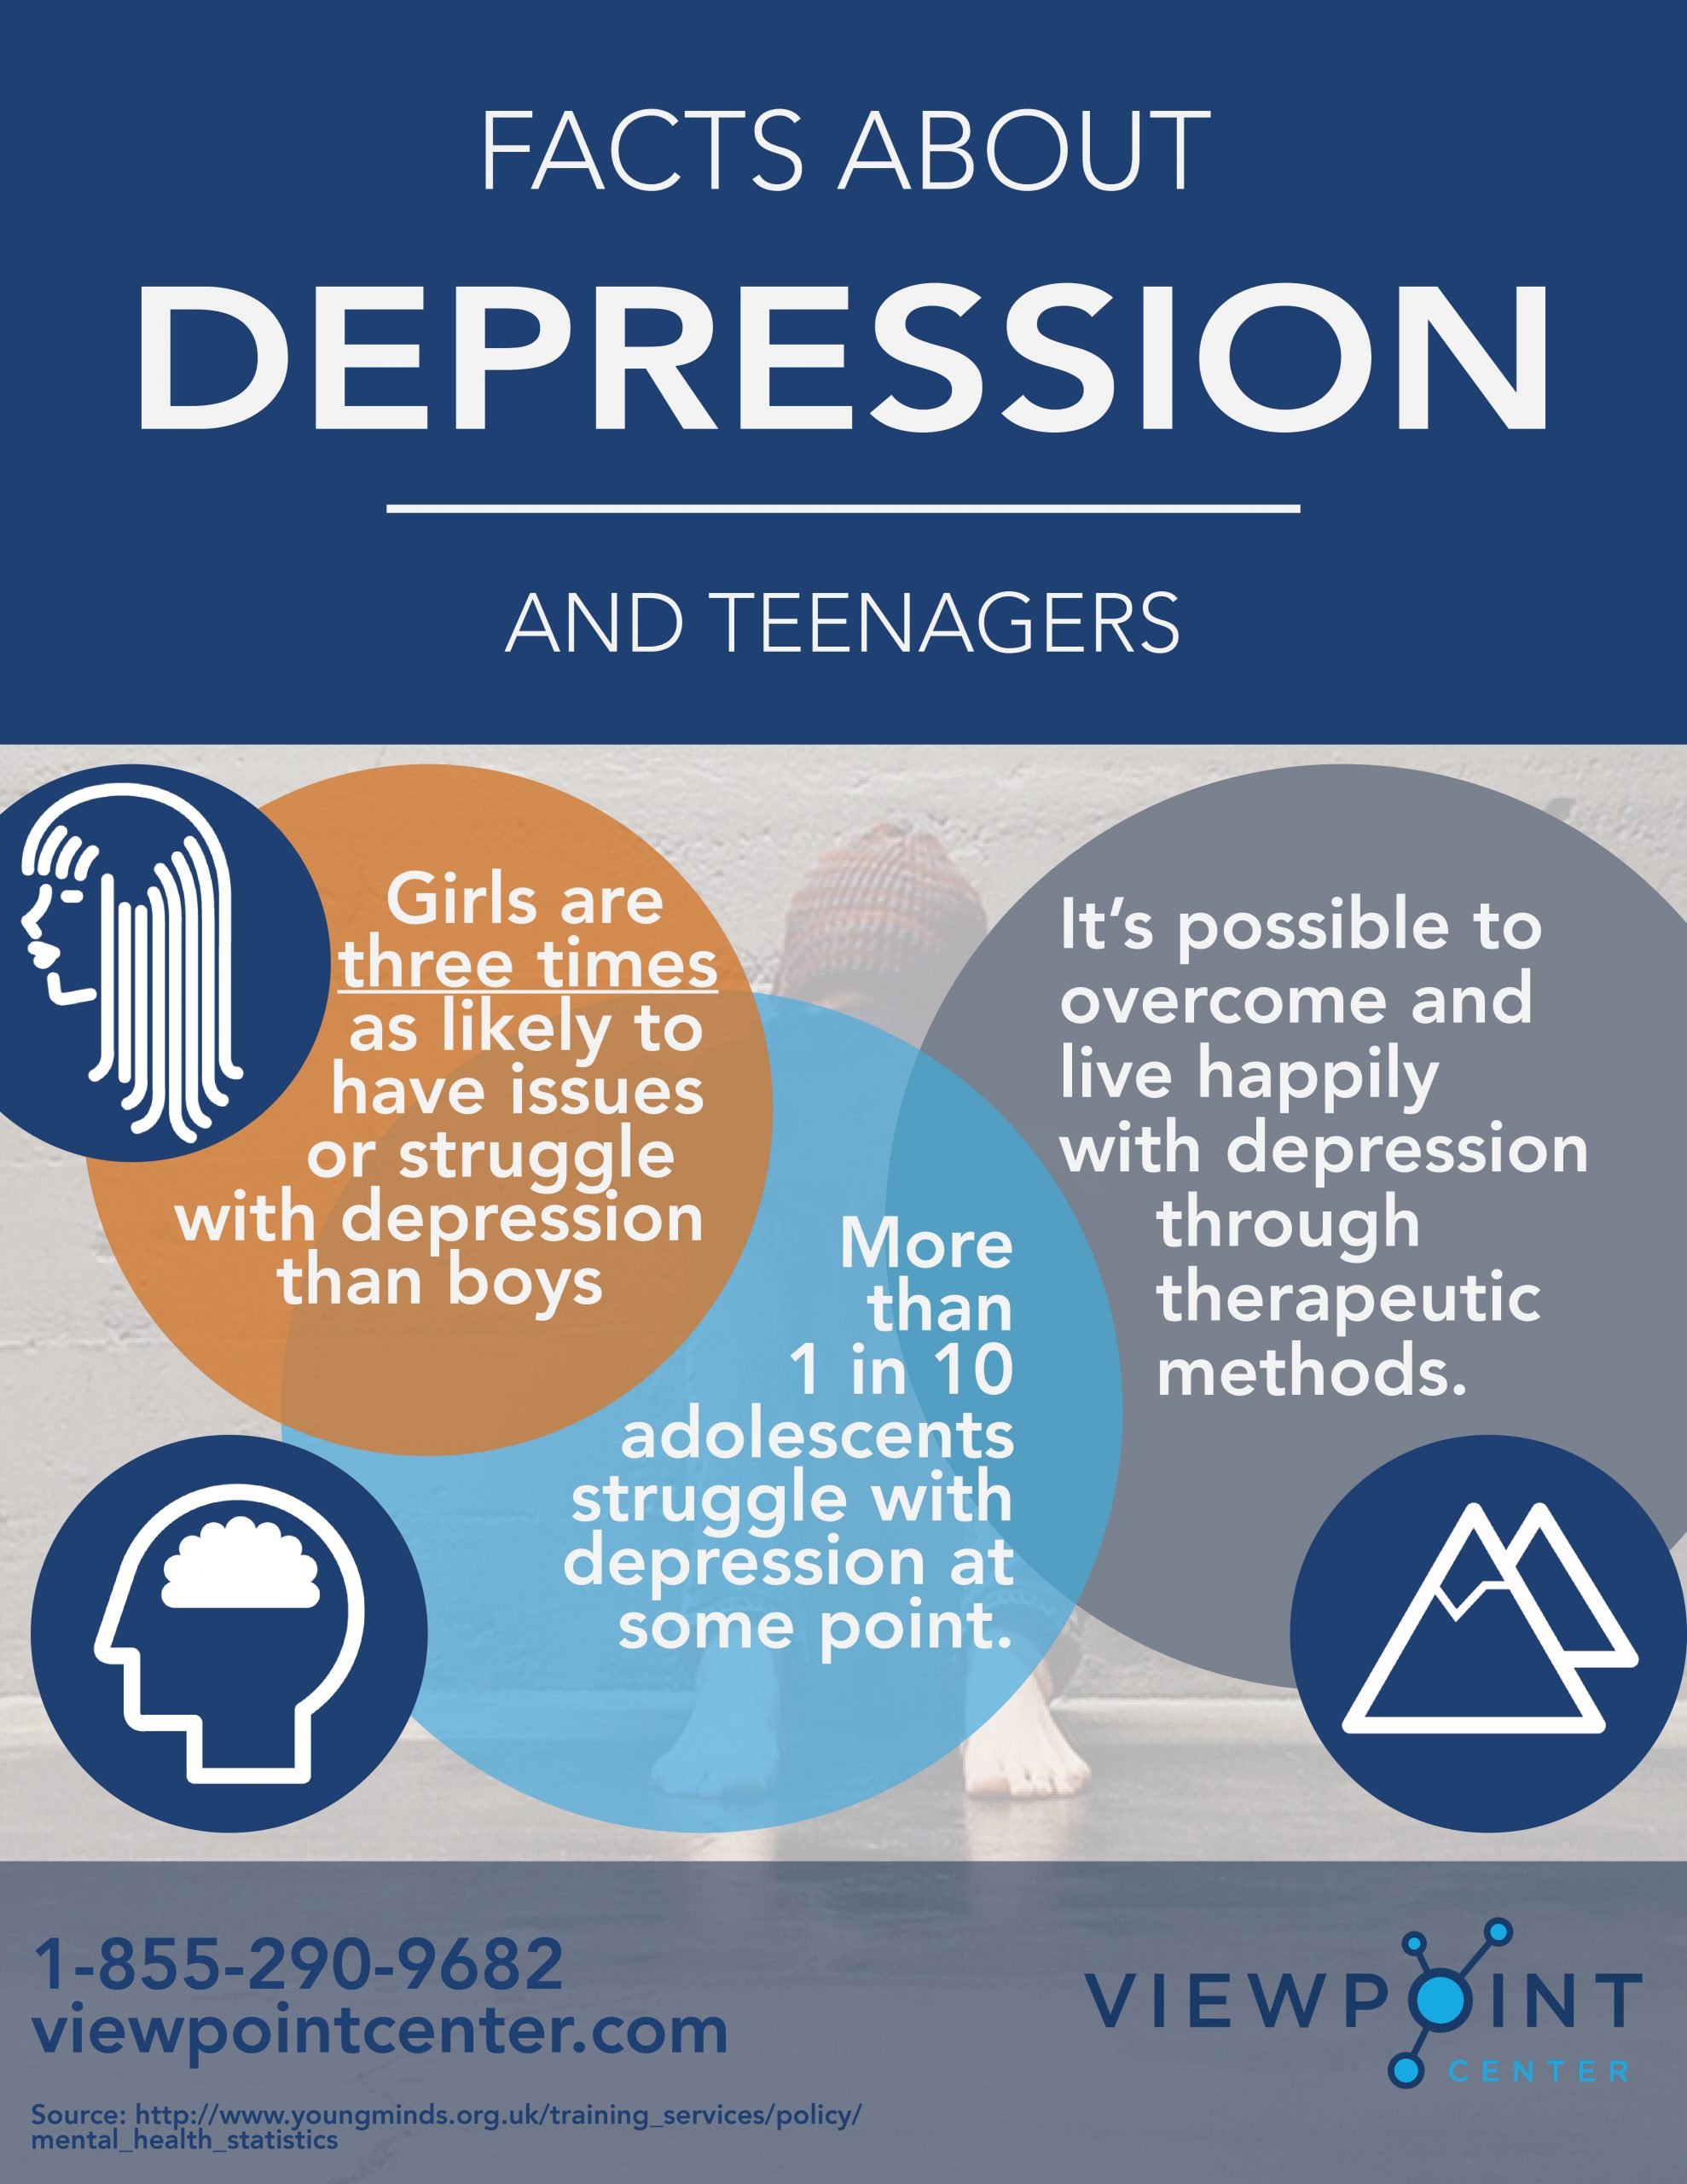 Symptoms of Depression in Teens Could Show Up Earlier Than Expected